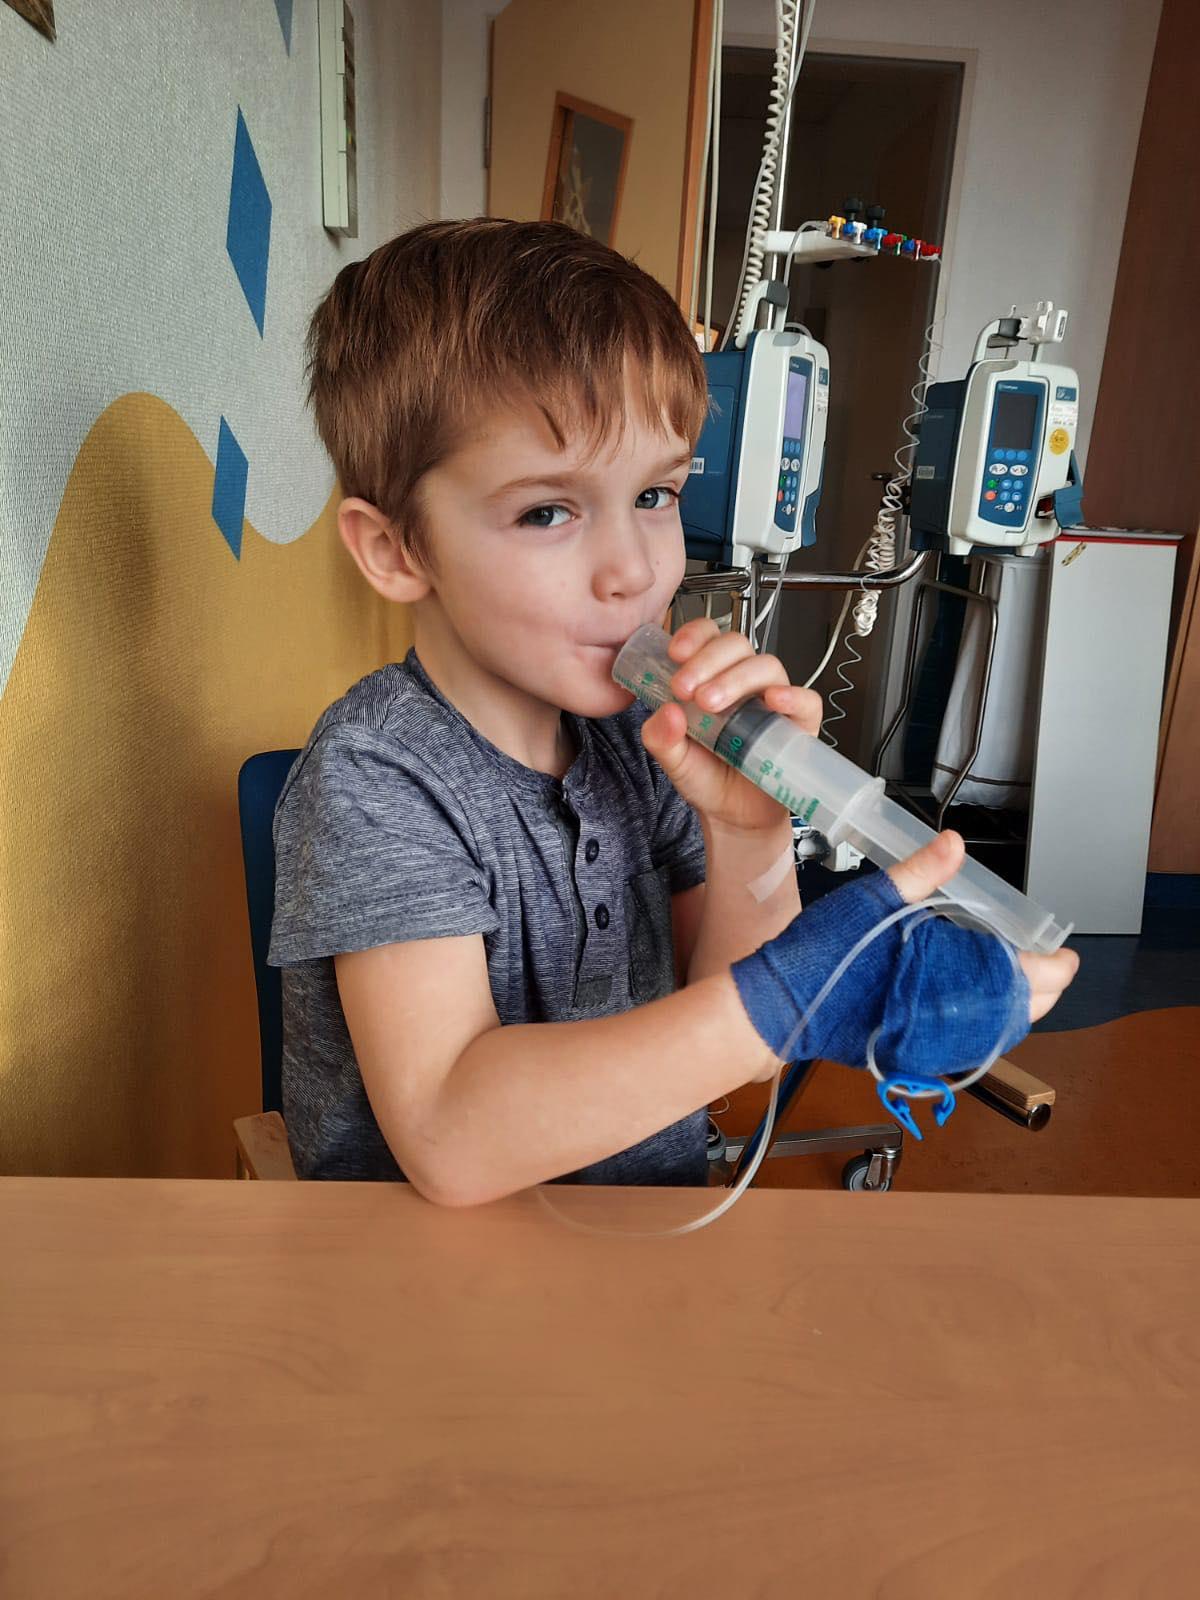 Kilian Sass, aged 6, suffers from lymphoma. (Courtesy of <a href="https://www.facebook.com/profile.php?id=100010828298195">Ralf Pietsch</a>)